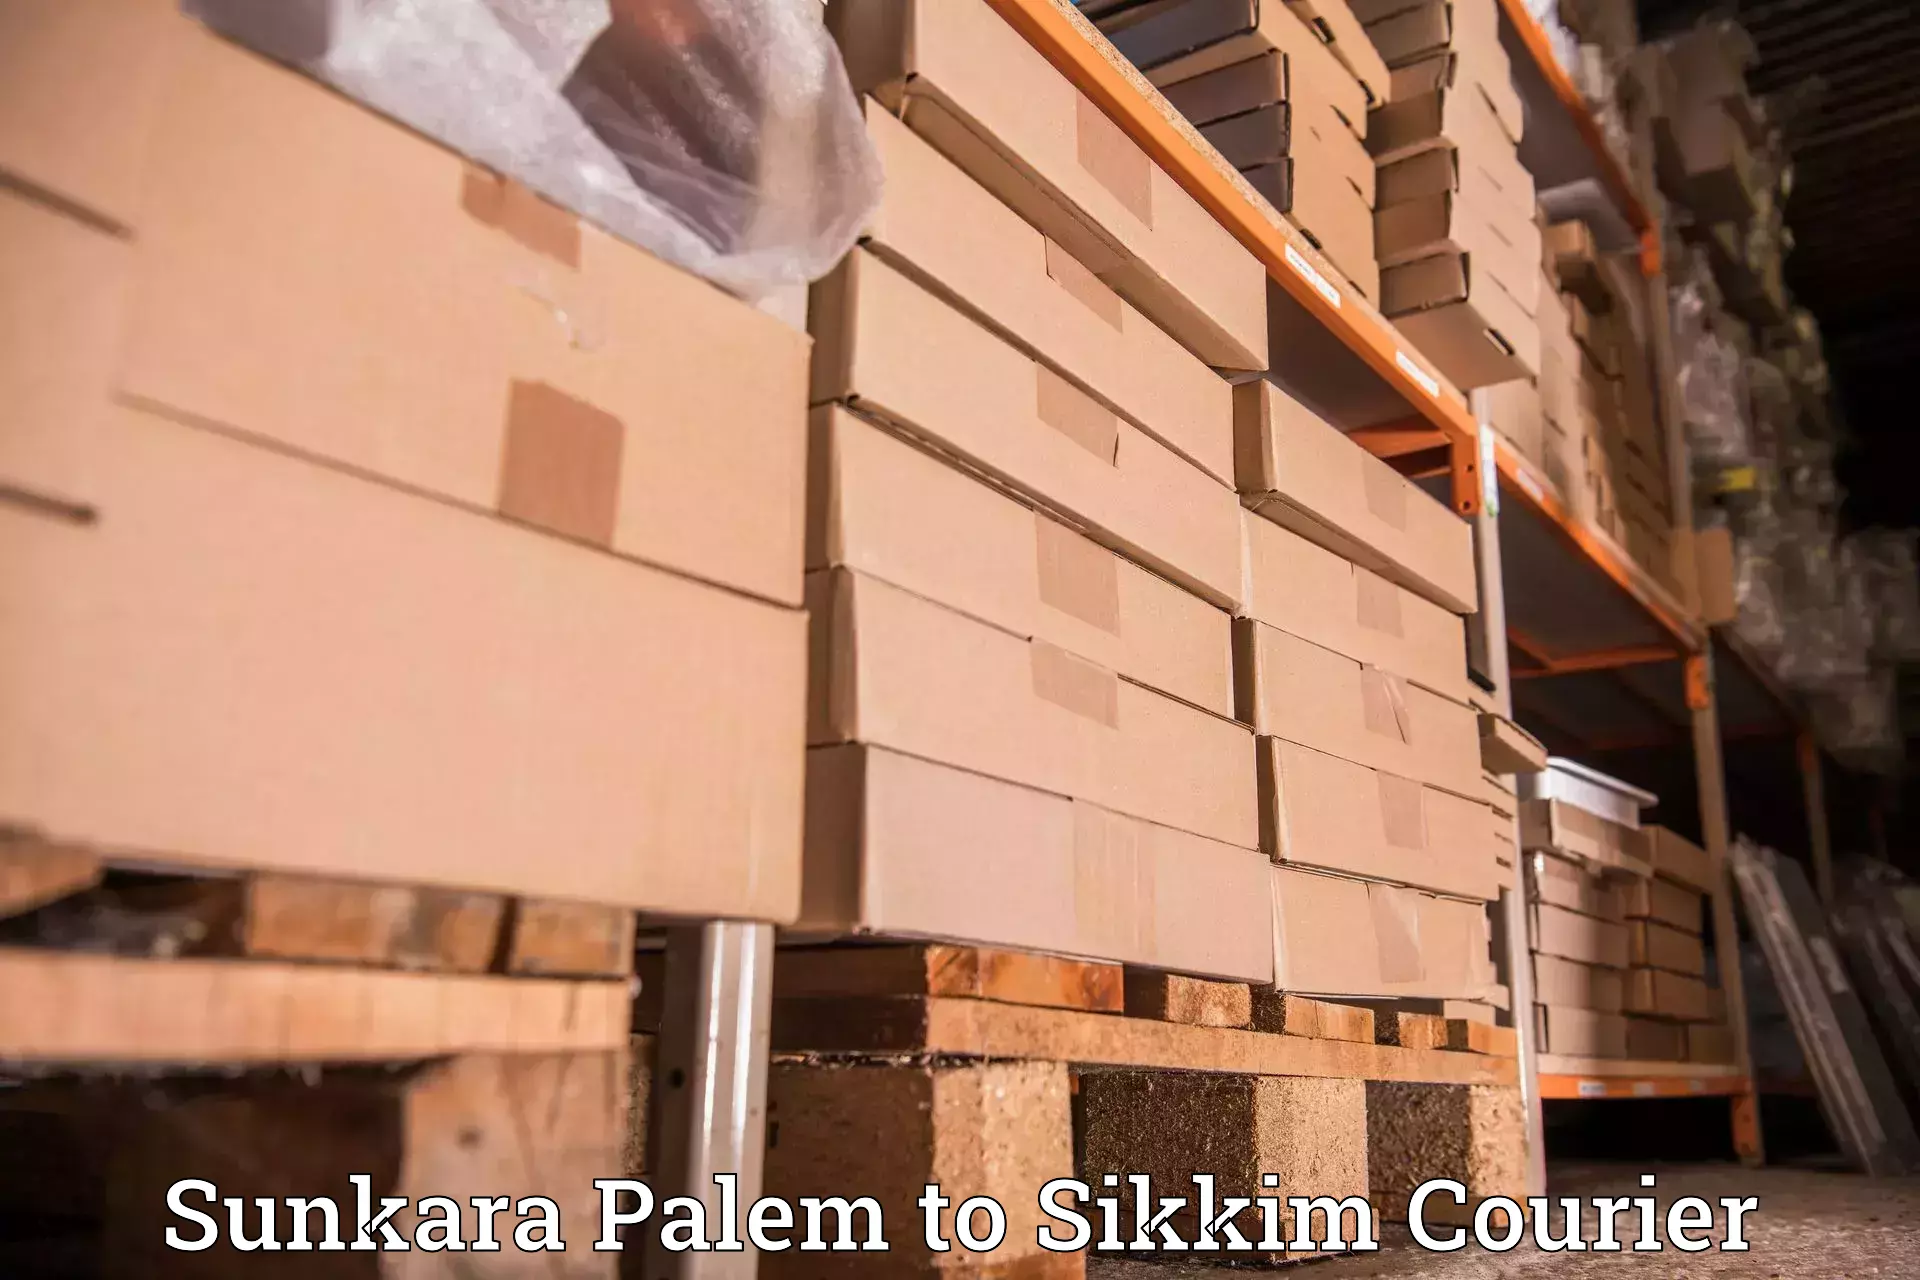 Reliable courier service in Sunkara Palem to Namchi